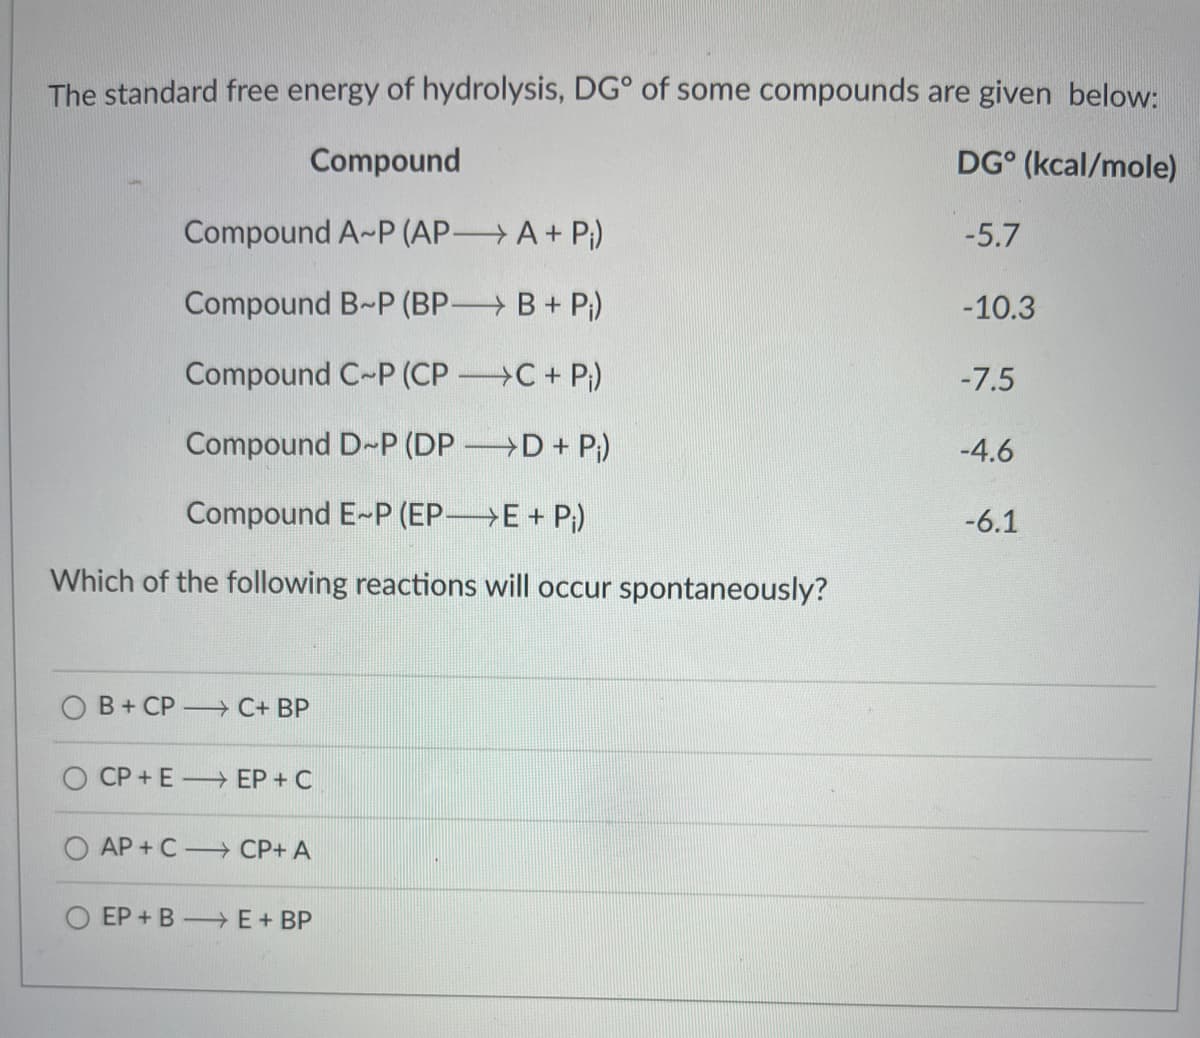 The standard free energy of hydrolysis, DG of some compounds are given below:
Compound
DG (kcal/mole)
Compound A-P (APA + P₁)
-5.7
Compound B-P (BPB+ P₁)
-10.3
Compound C-P (CPC + P₁)
-7.5
Compound D-P (DPD + P₁)
-4.6
Compound E-P (EP-E + P₁)
-6.1
Which of the following reactions will occur spontaneously?
B+ CP C+ BP
CP+E EP + C
O AP+C CP+ A
EP+BE+ BP
O